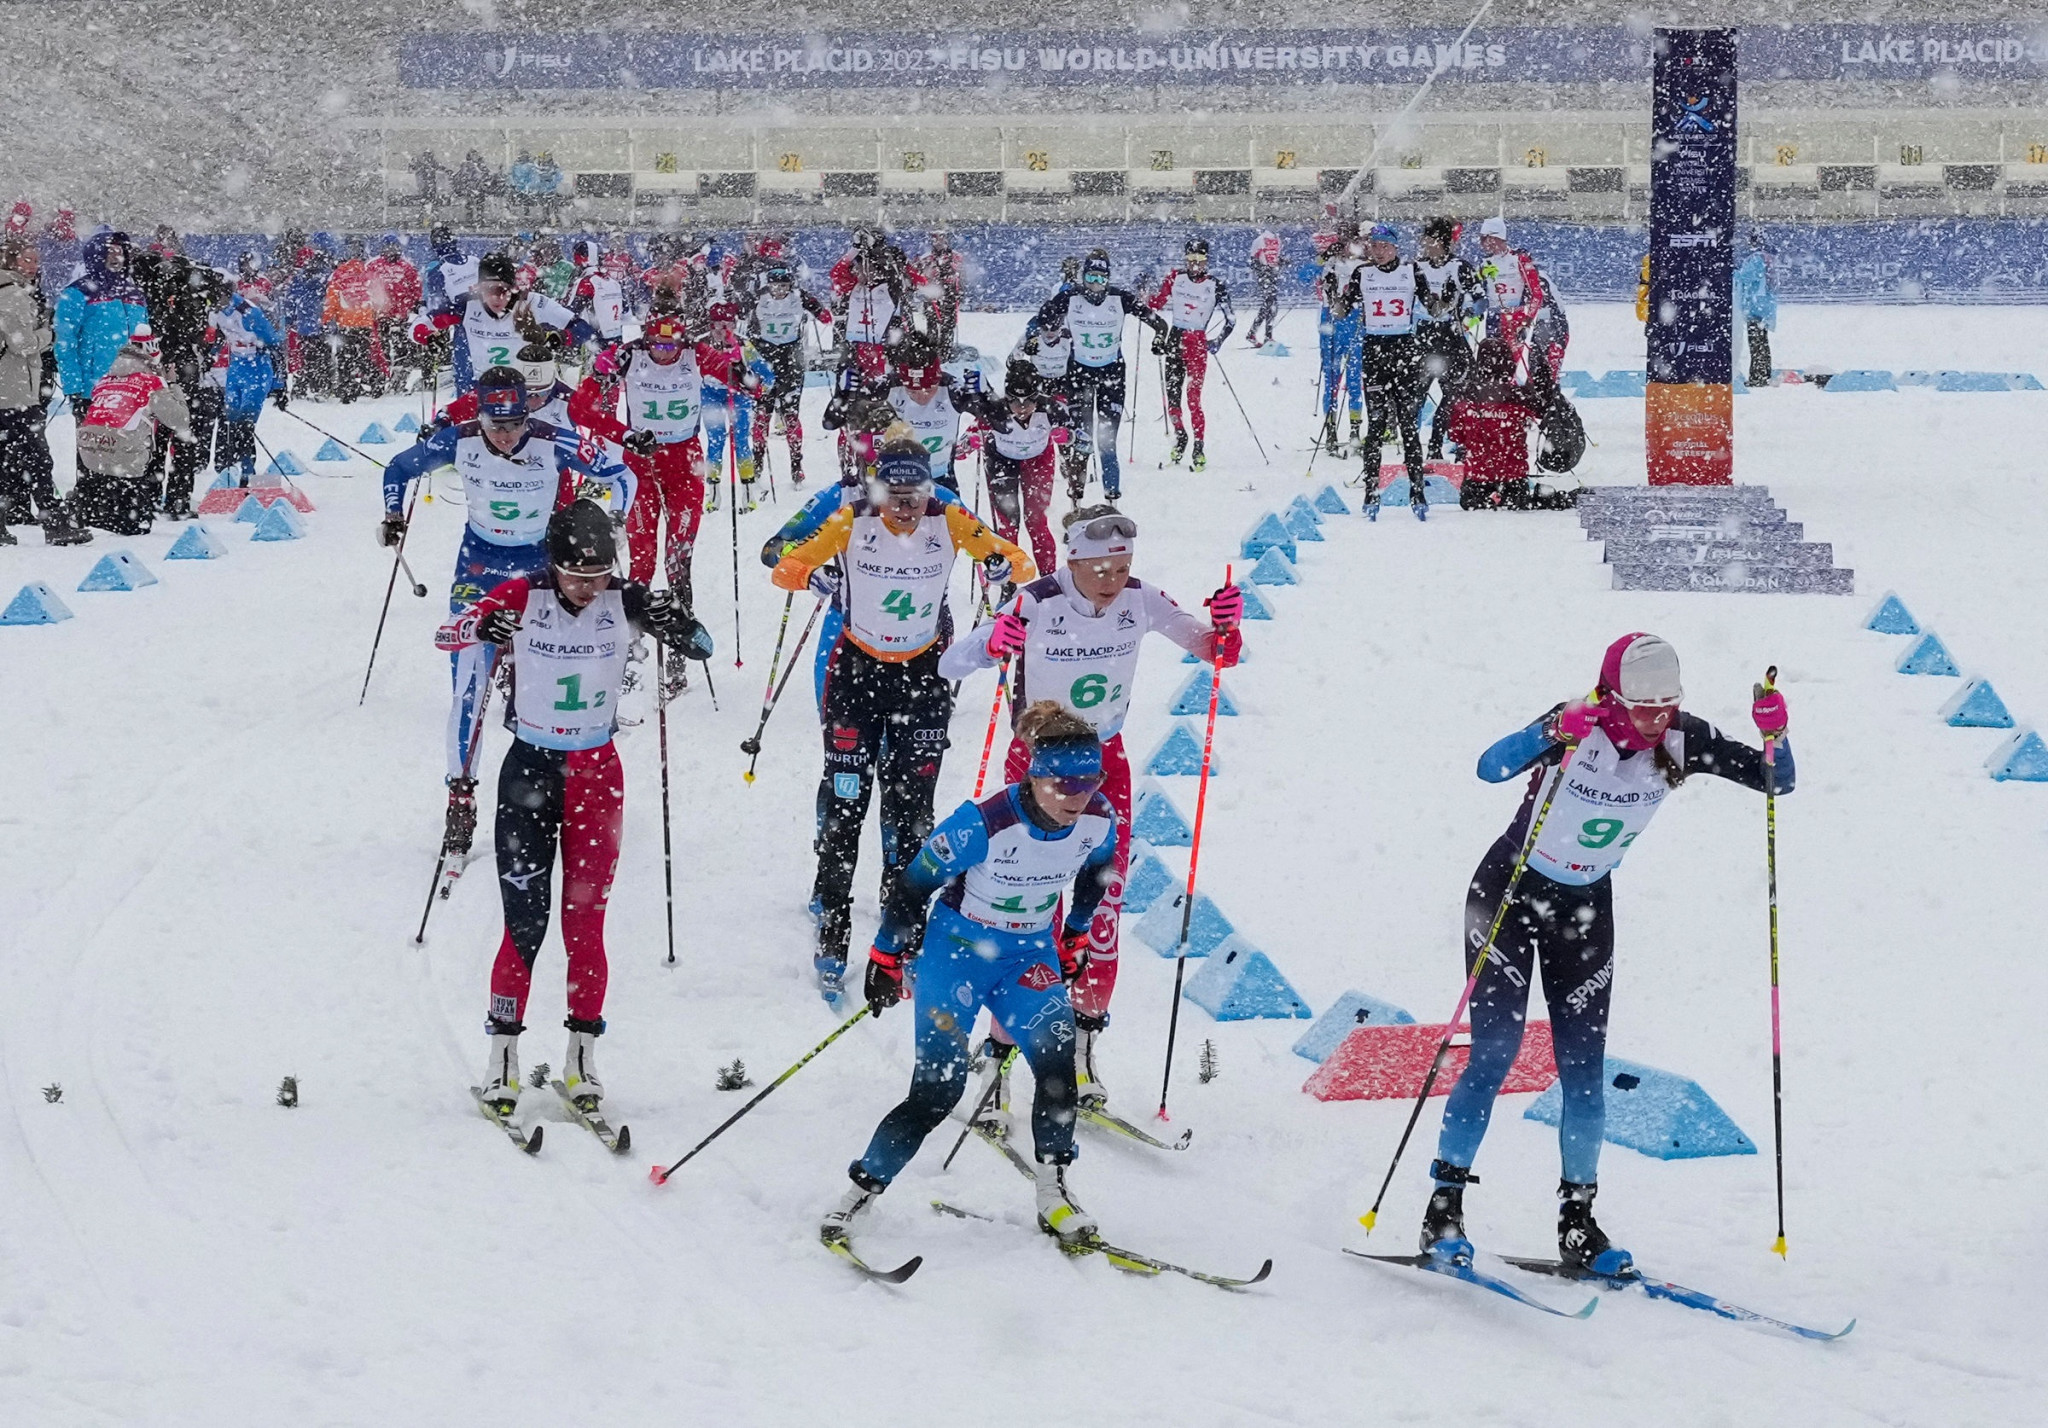 The mixed team sprint classic was the opening competition of the cross-country skiing programme in Lake Placid ©FISU